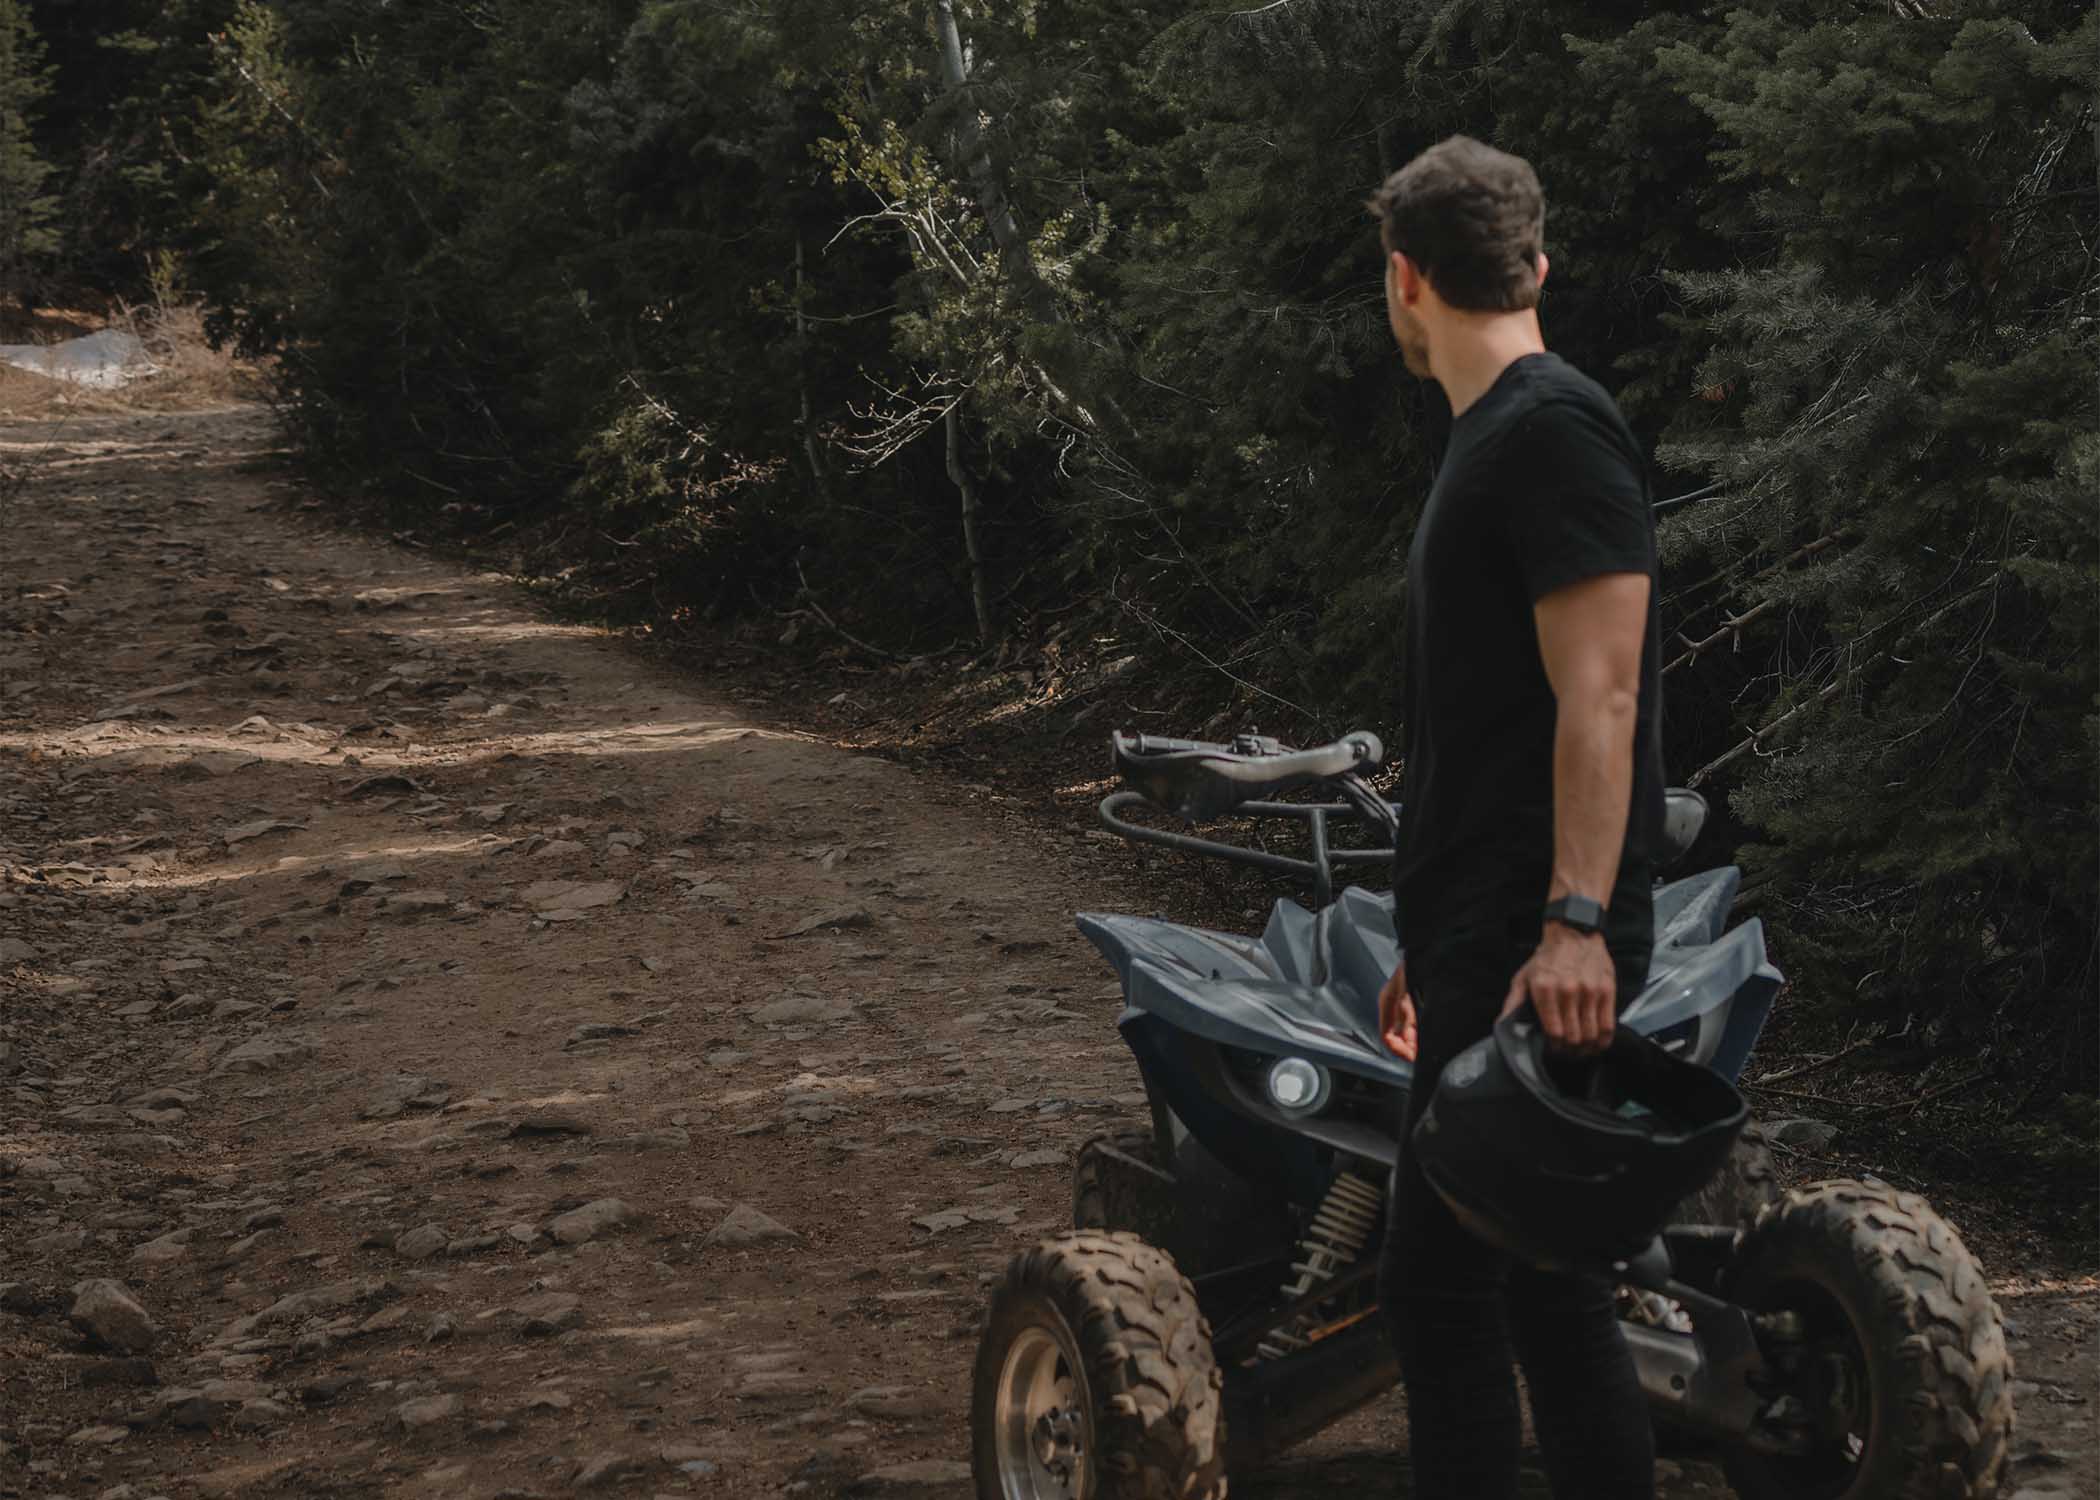 ATV rider looking back on a dirt road